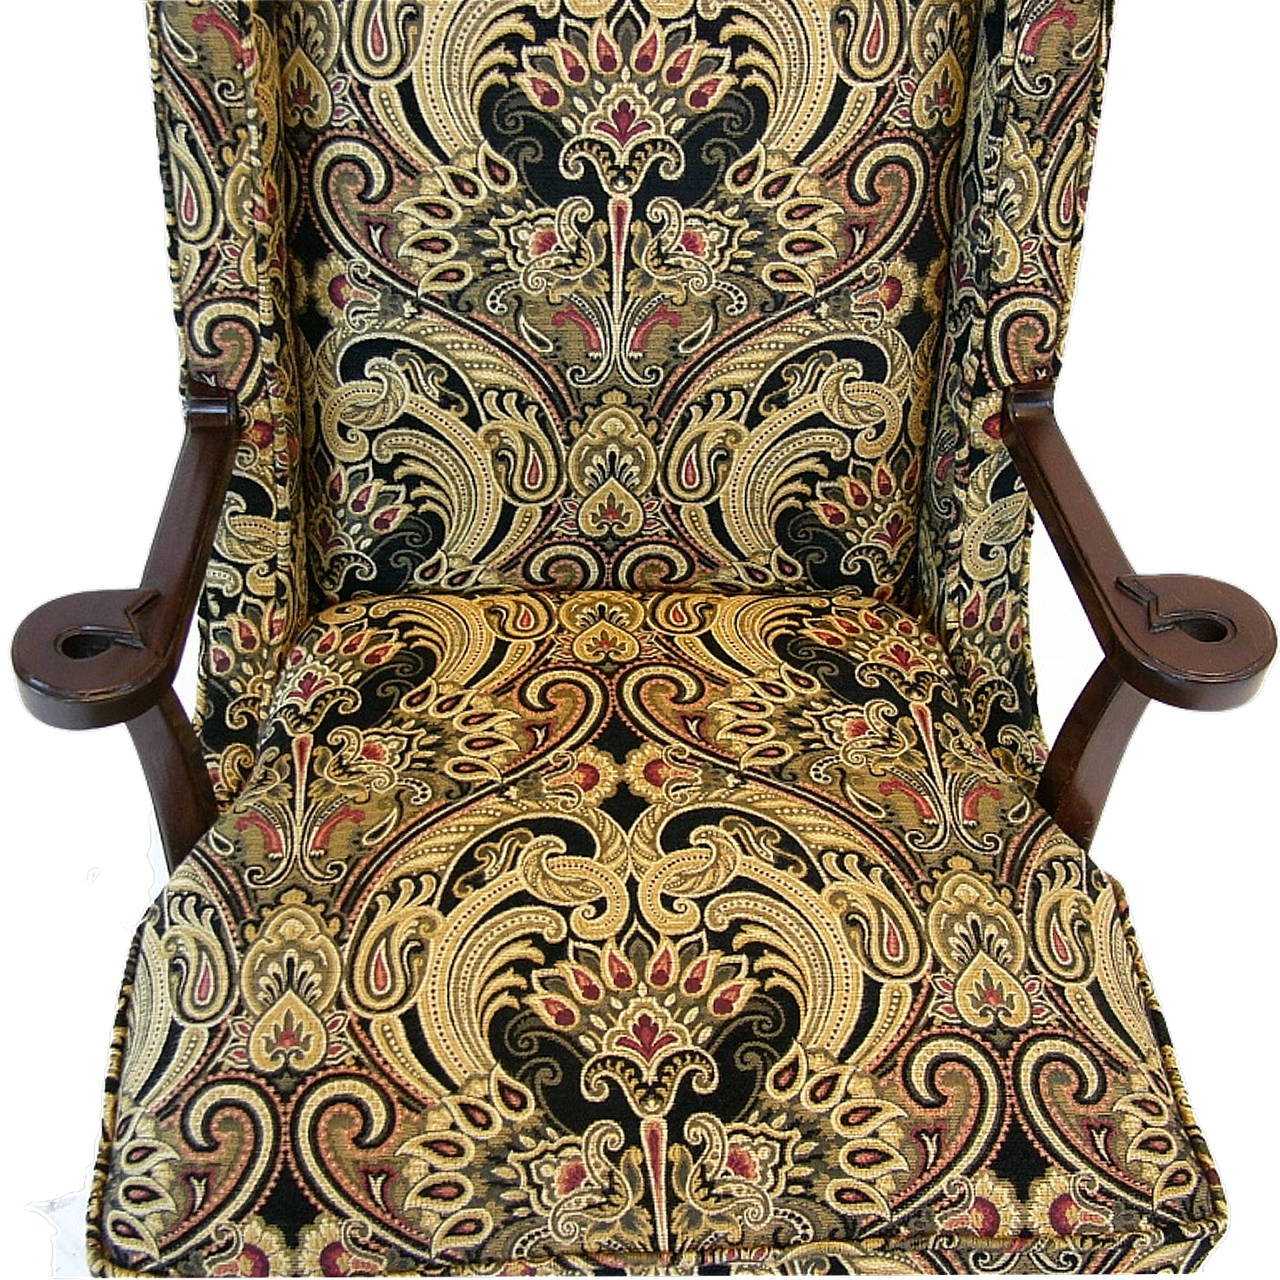 Hollywood Regency Pair of Tommi Parzinger Chairs with Tapestry Upholstery for Charak